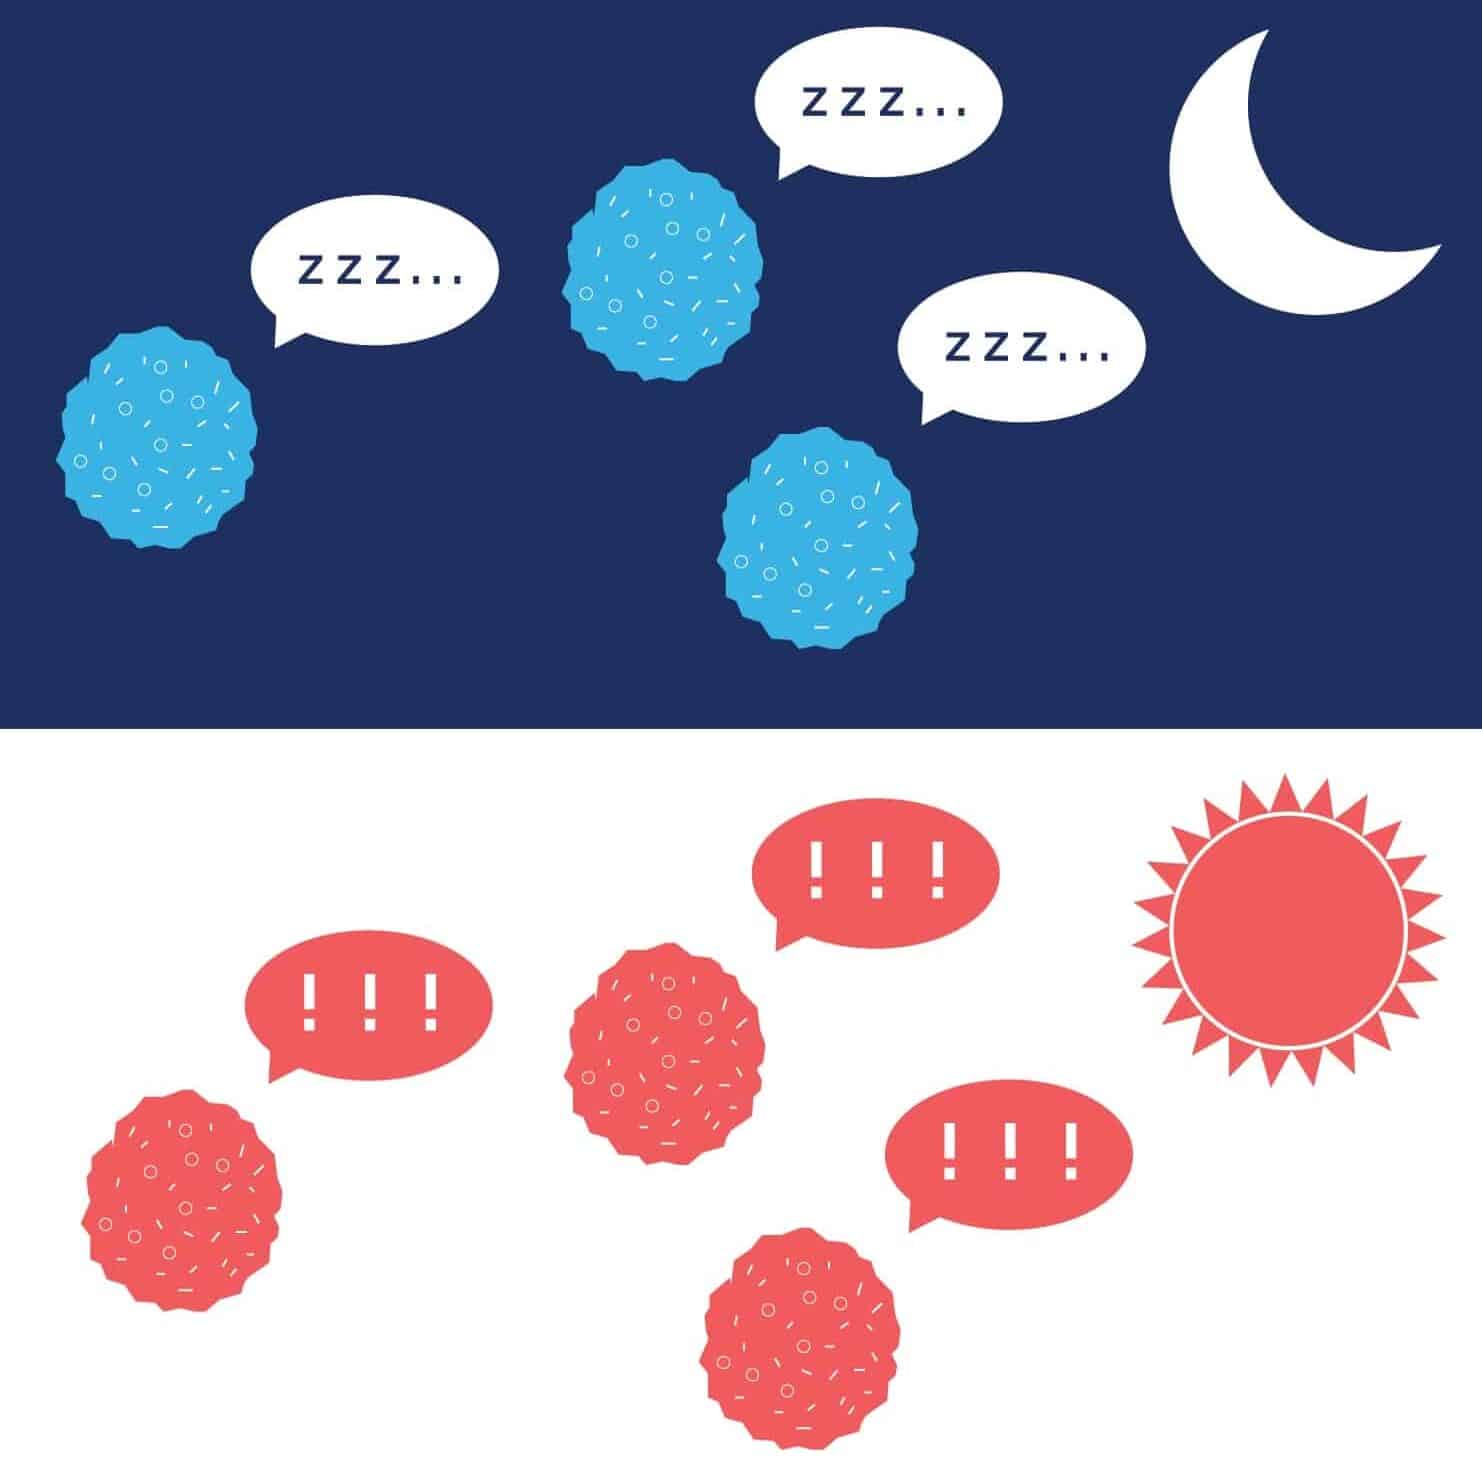 Illustration of cells "sleeping" and "waking up"